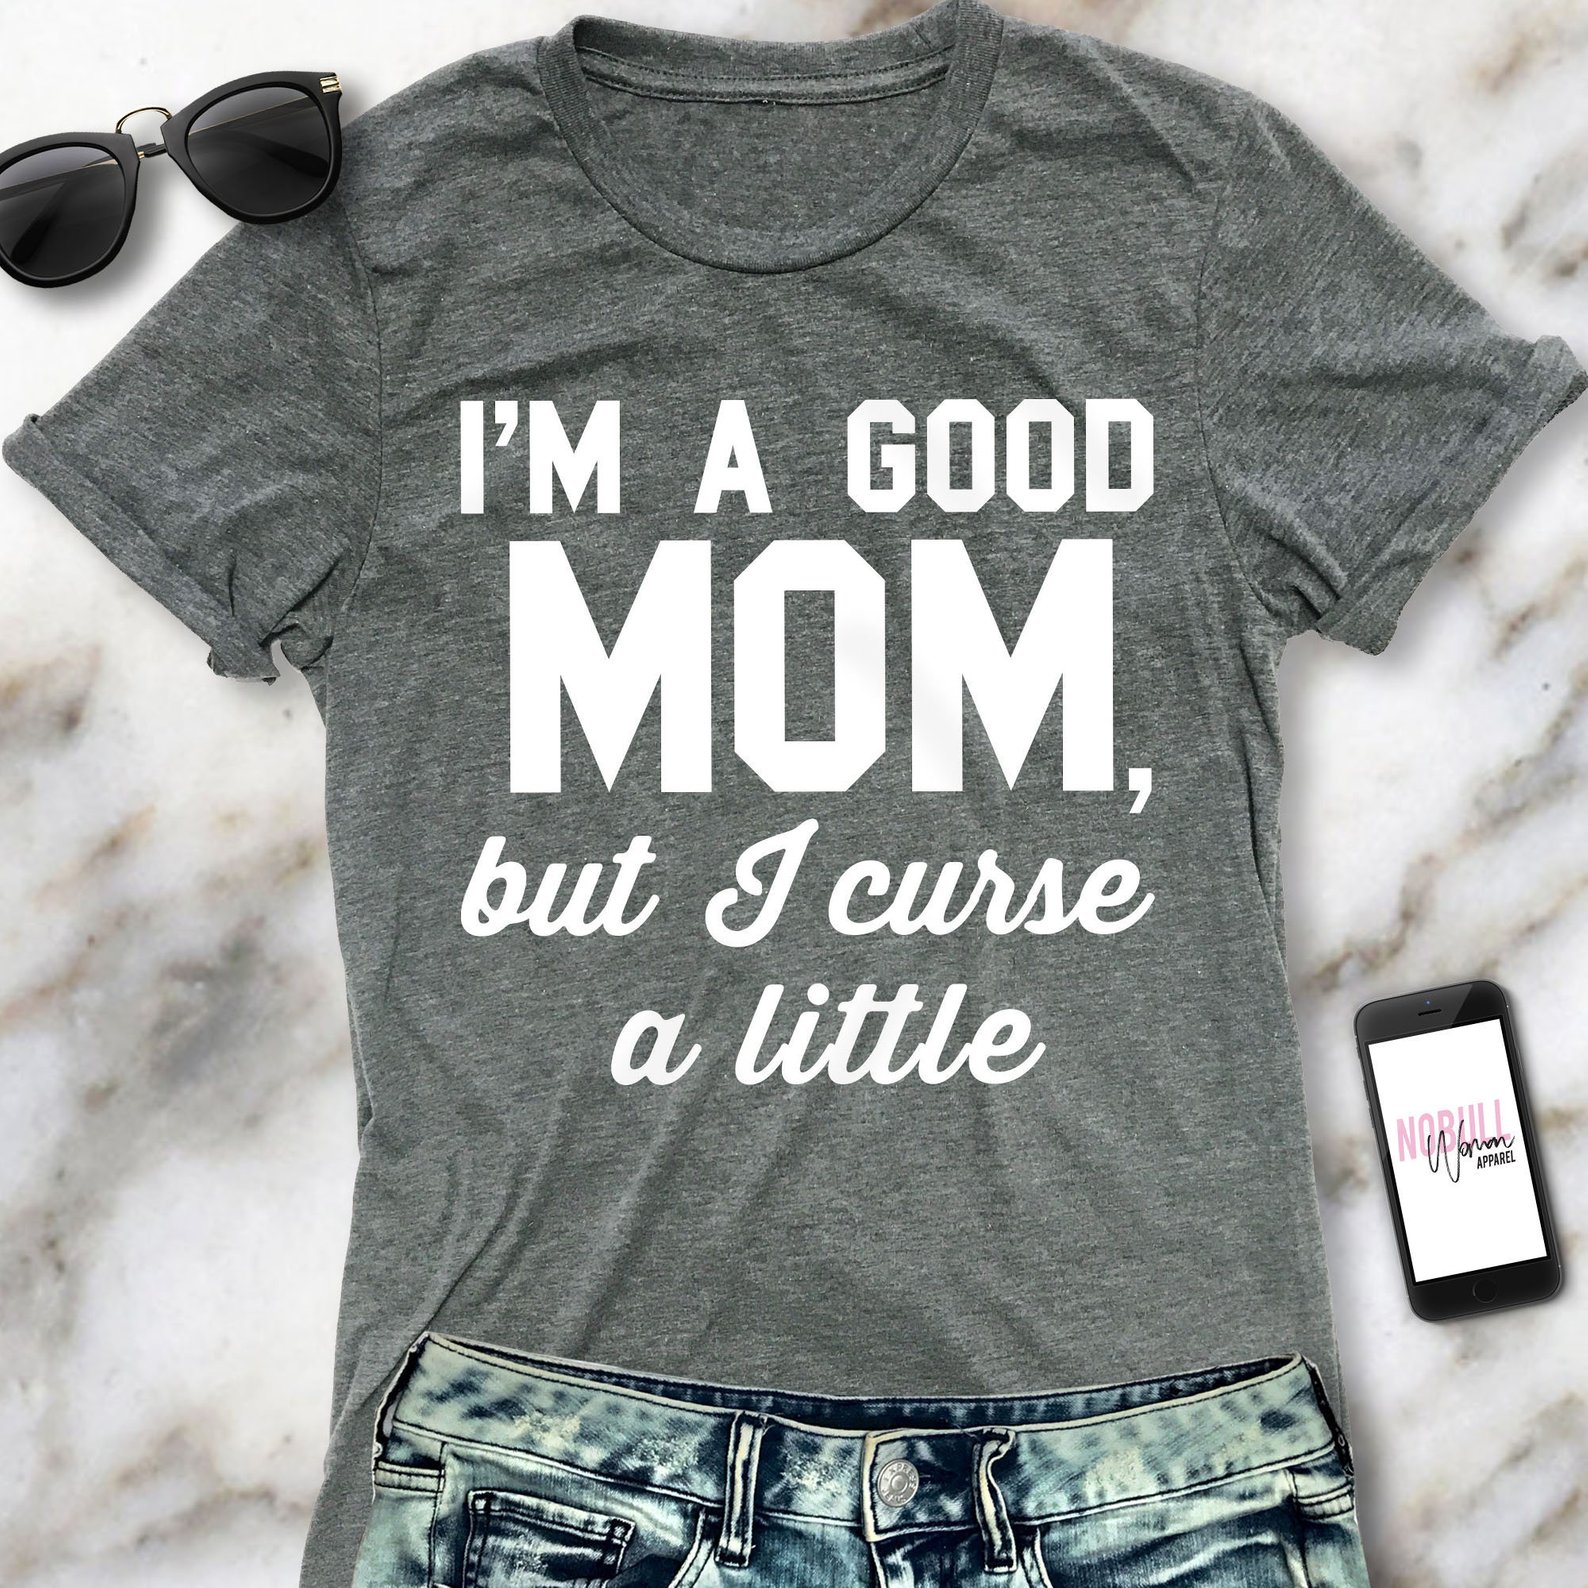 I'm a Good Mom, But...